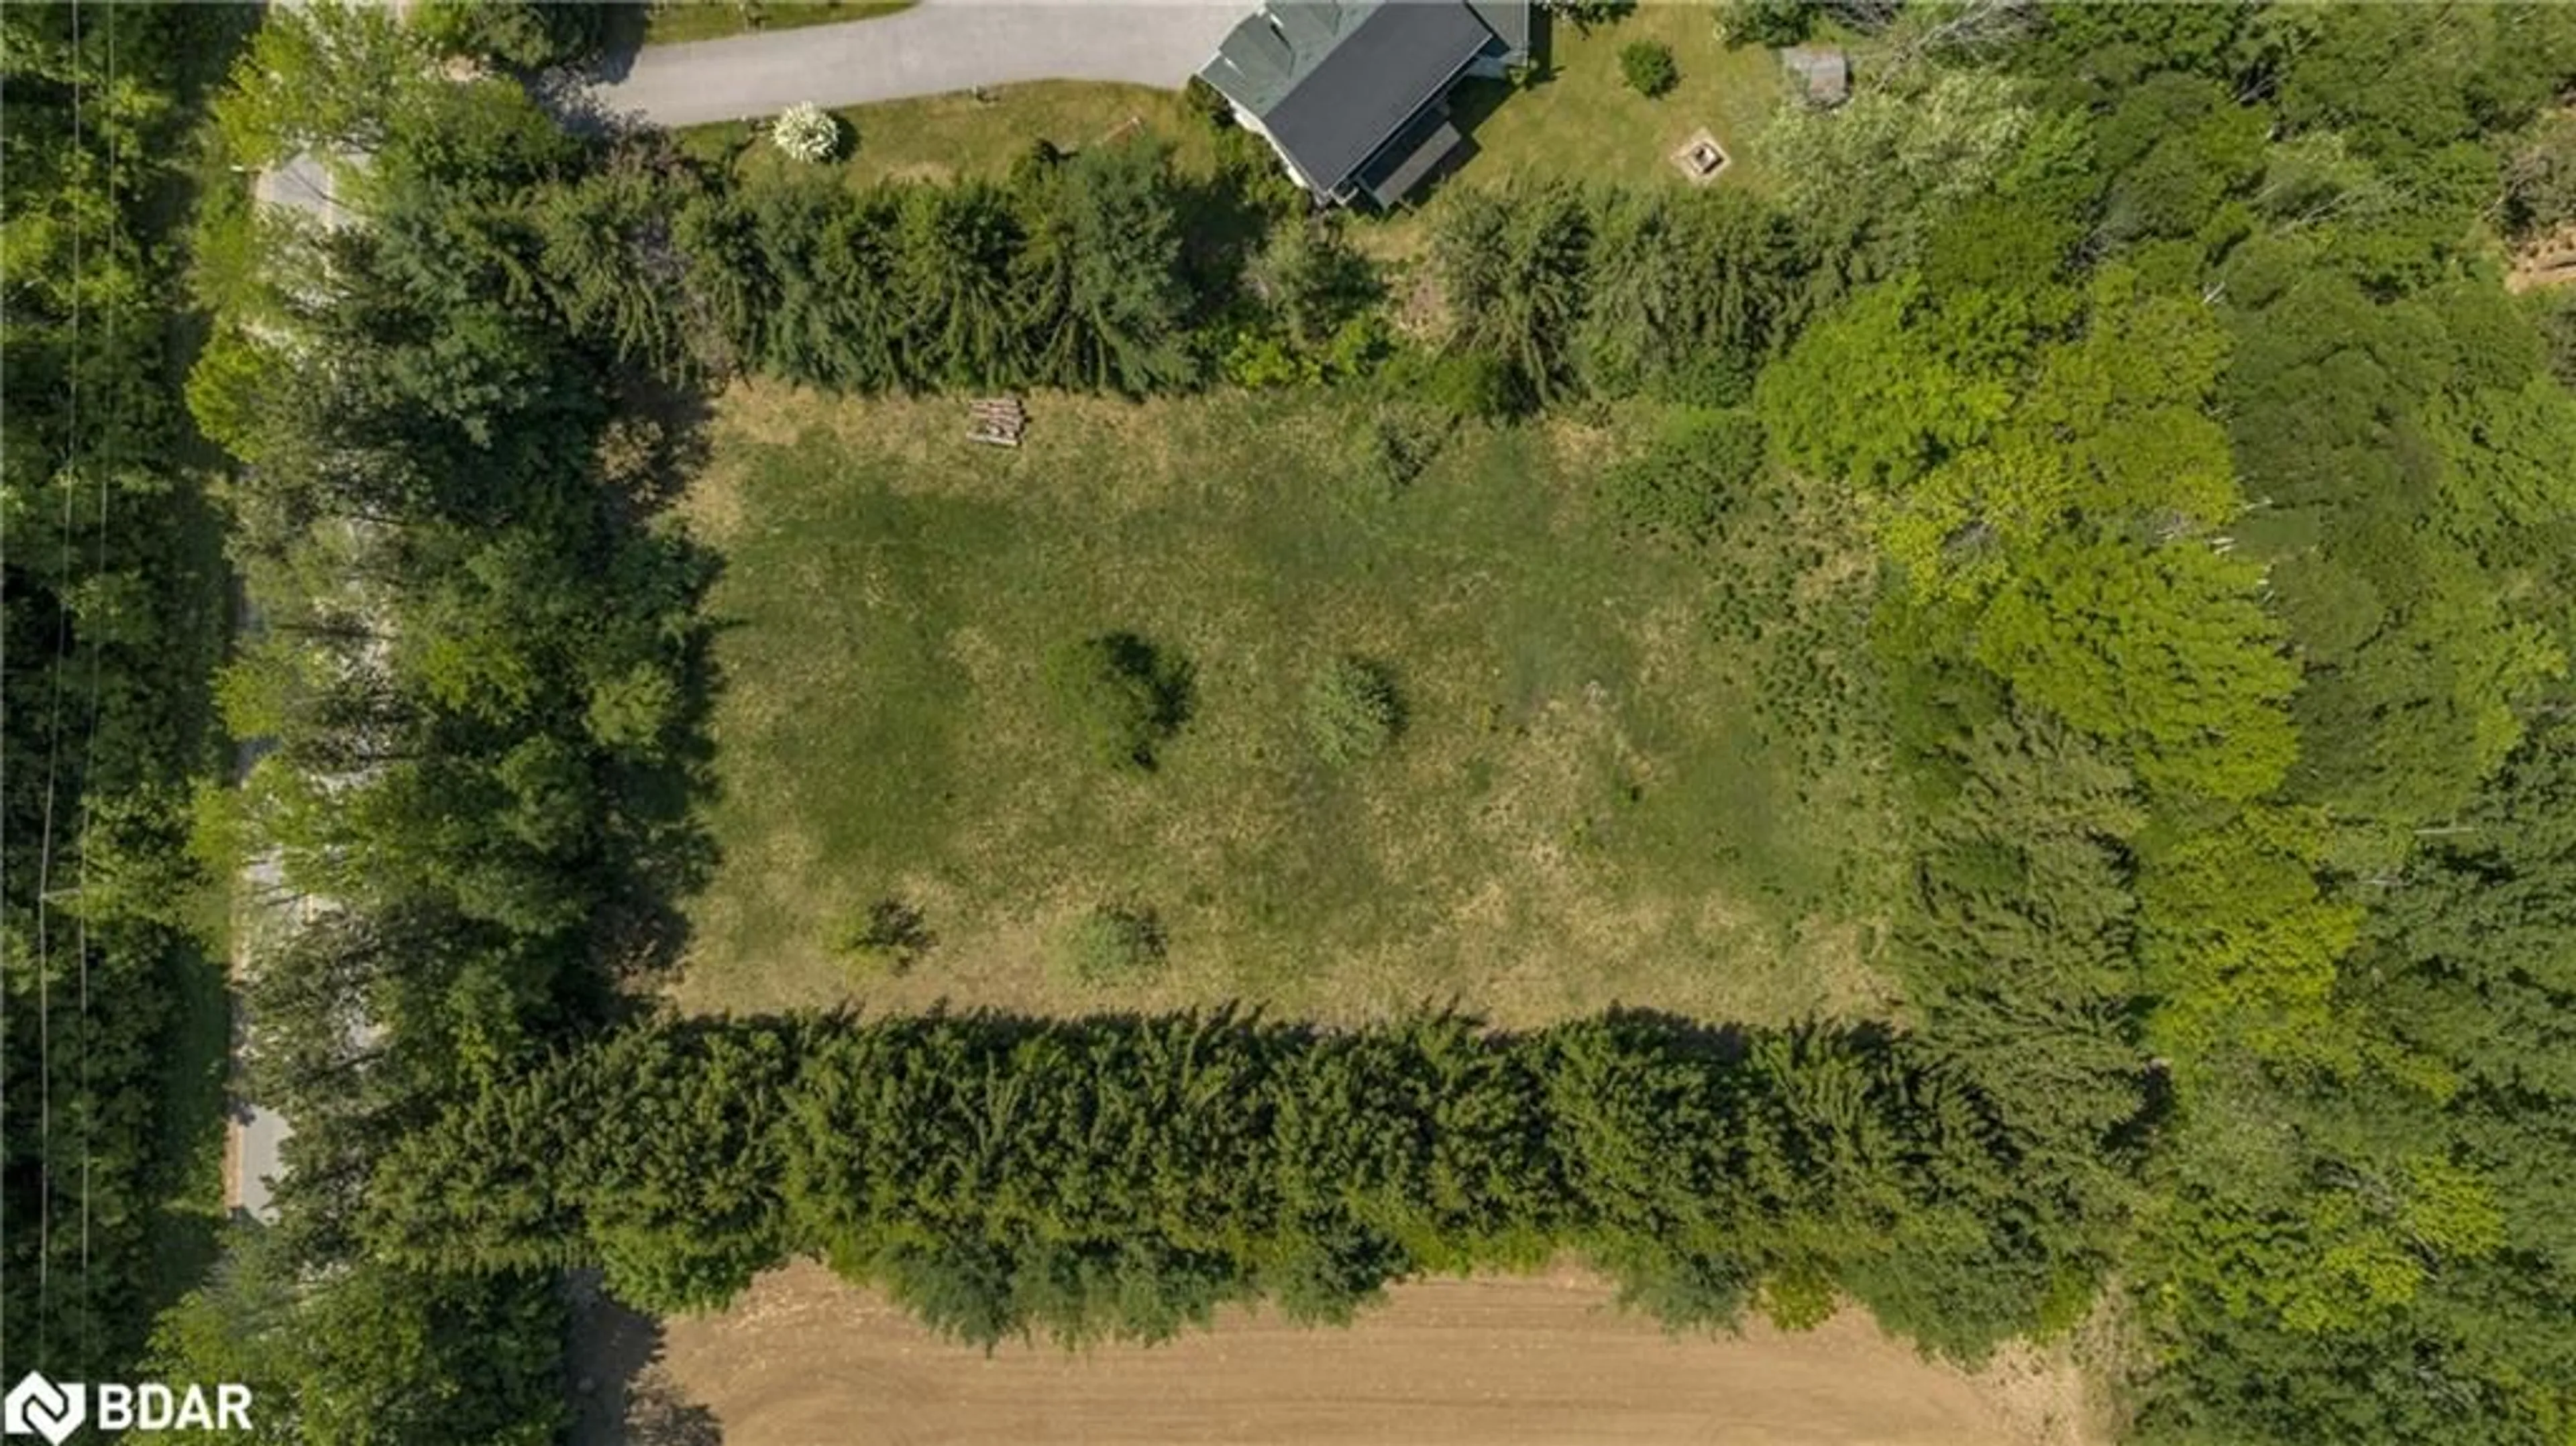 Fenced yard for PART 3 - 712 Mt St Louis Rd, Oro-Medonte Ontario L0L 1V0